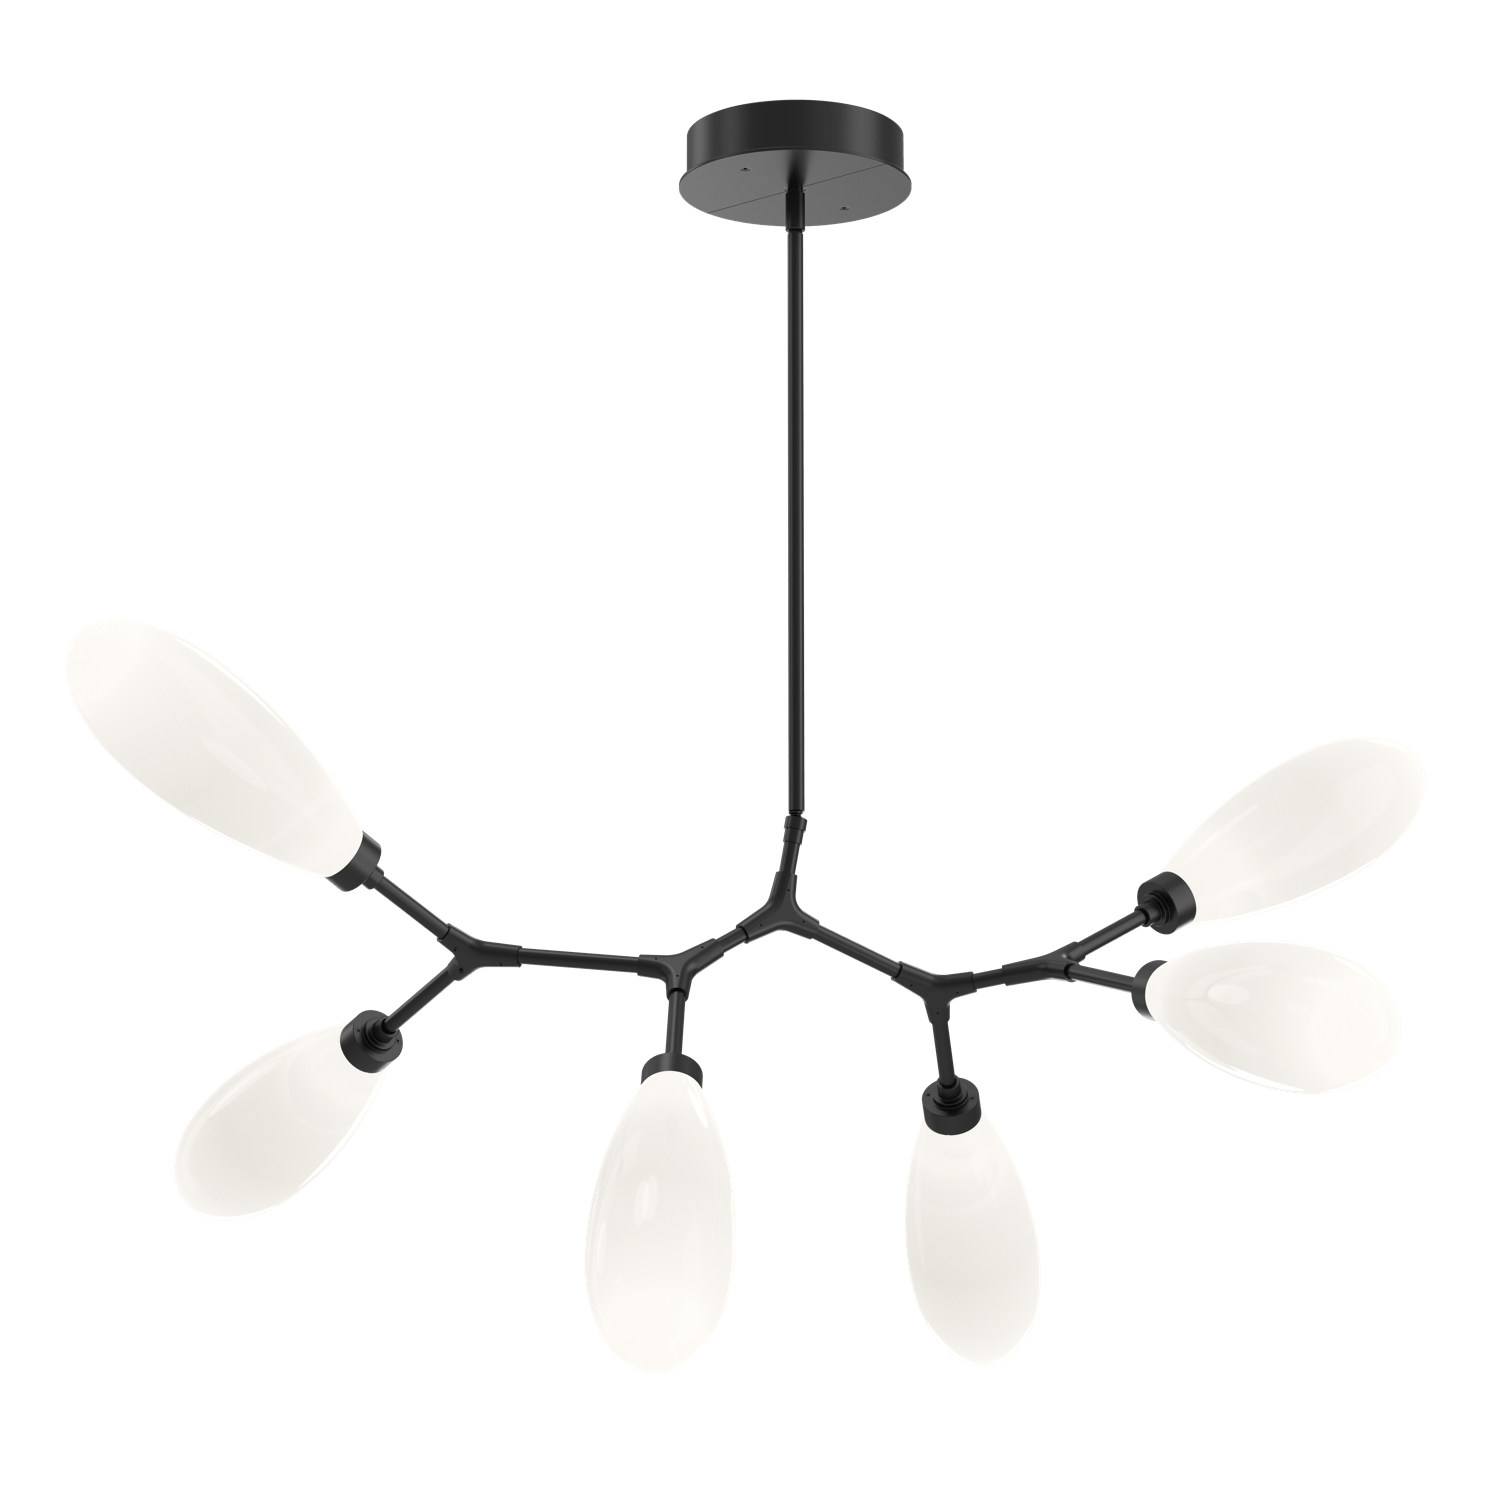 PLB0071-BA-MB-WL-LL-Hammerton-Studio-Fiori-6-light-organic-branch-chandelier-with-matte-black-finish-and-opal-white-glass-shades-and-LED-lamping